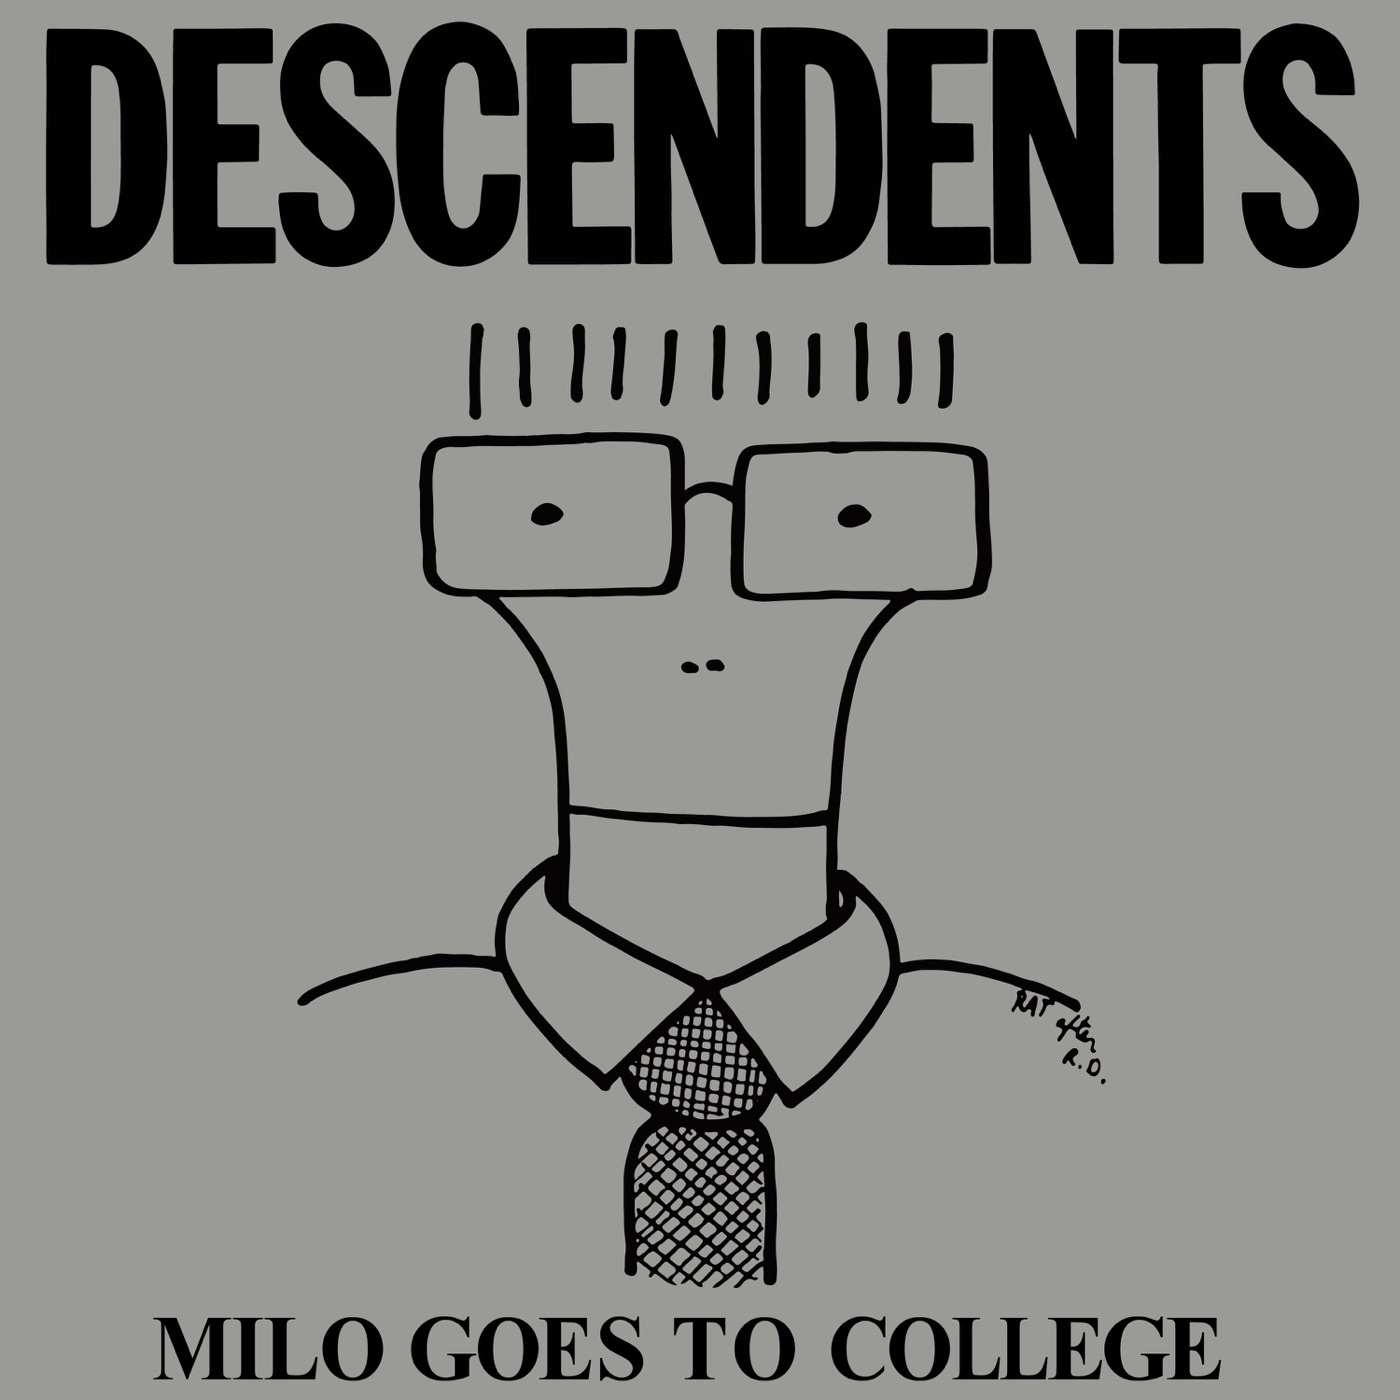 Milo Goes to College by Descendents